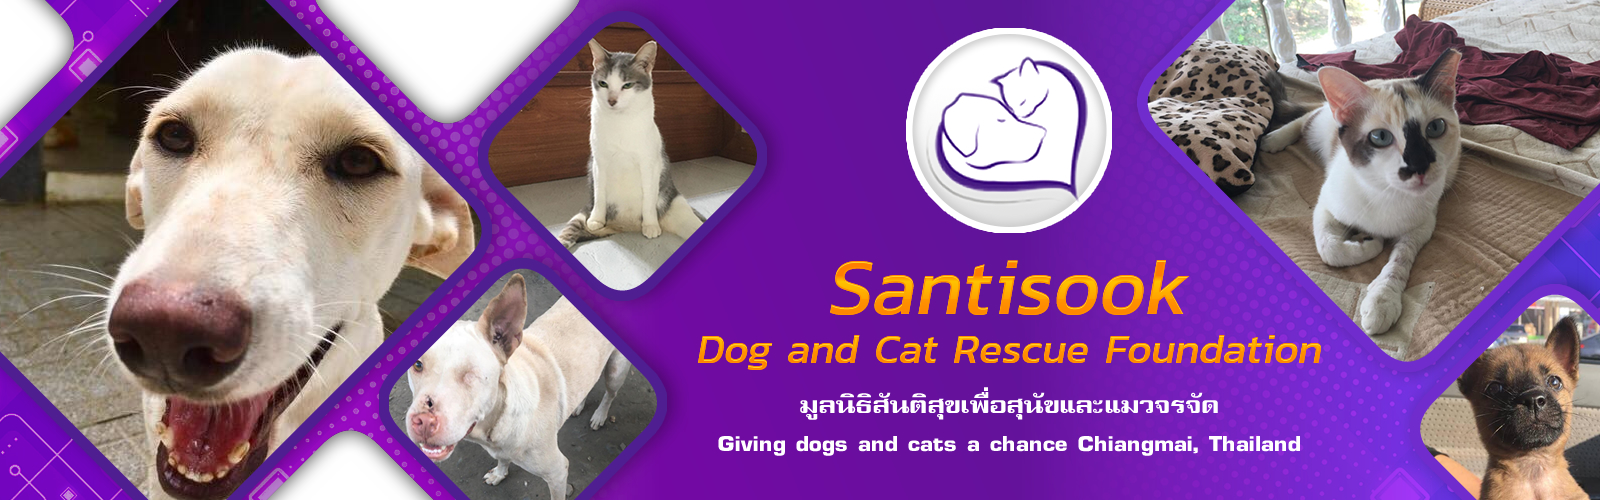 Santisook dog and cat rescue foundation